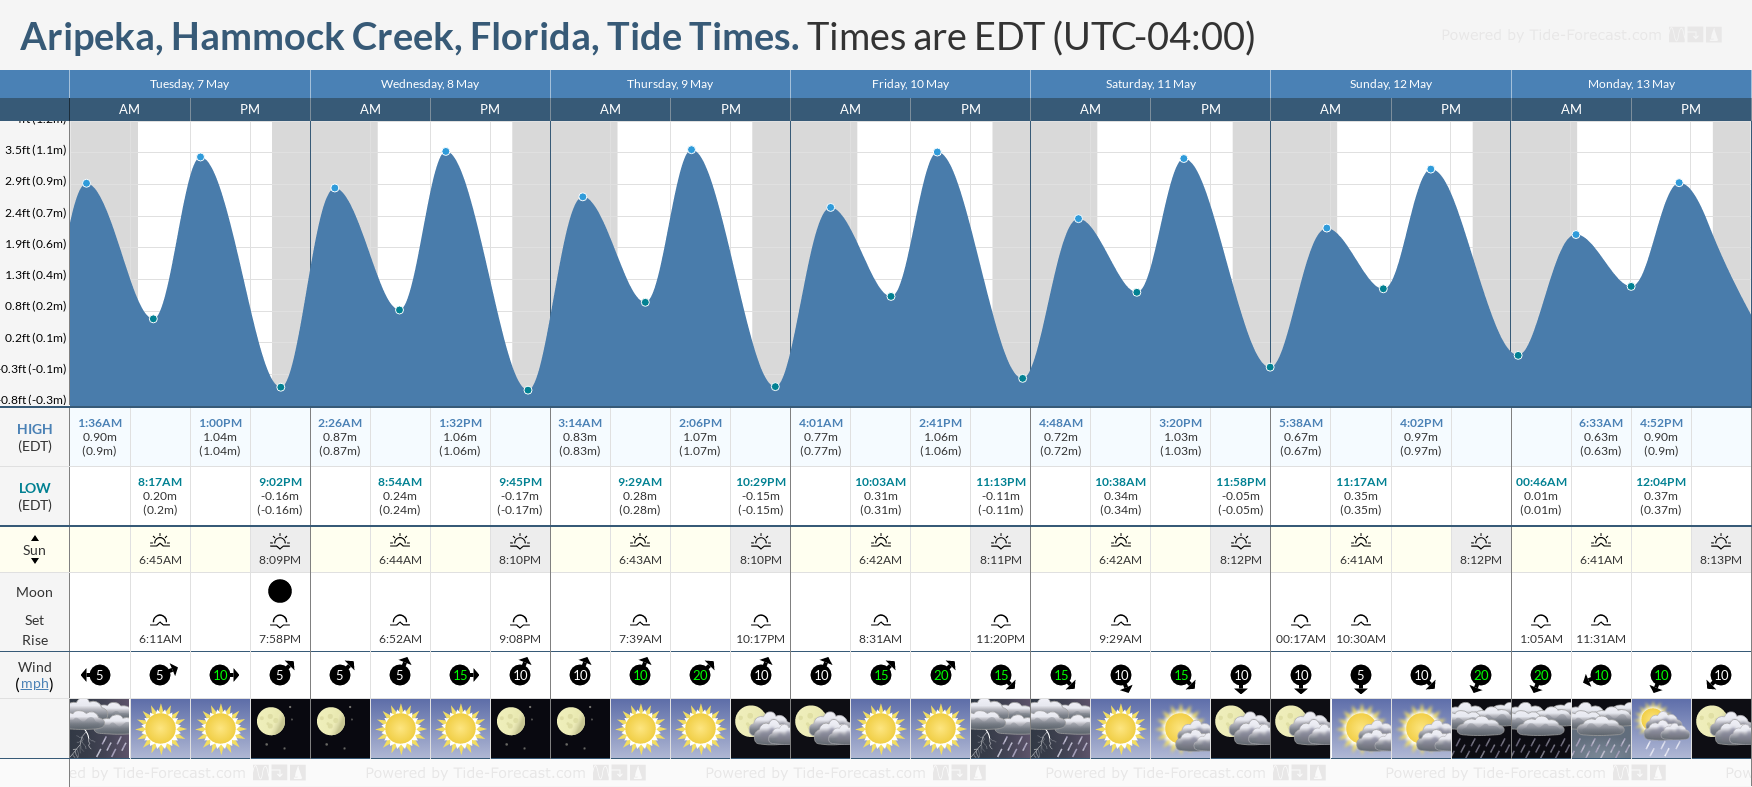 Aripeka, Hammock Creek, Florida Tide Chart including high and low tide tide times for the next 7 days